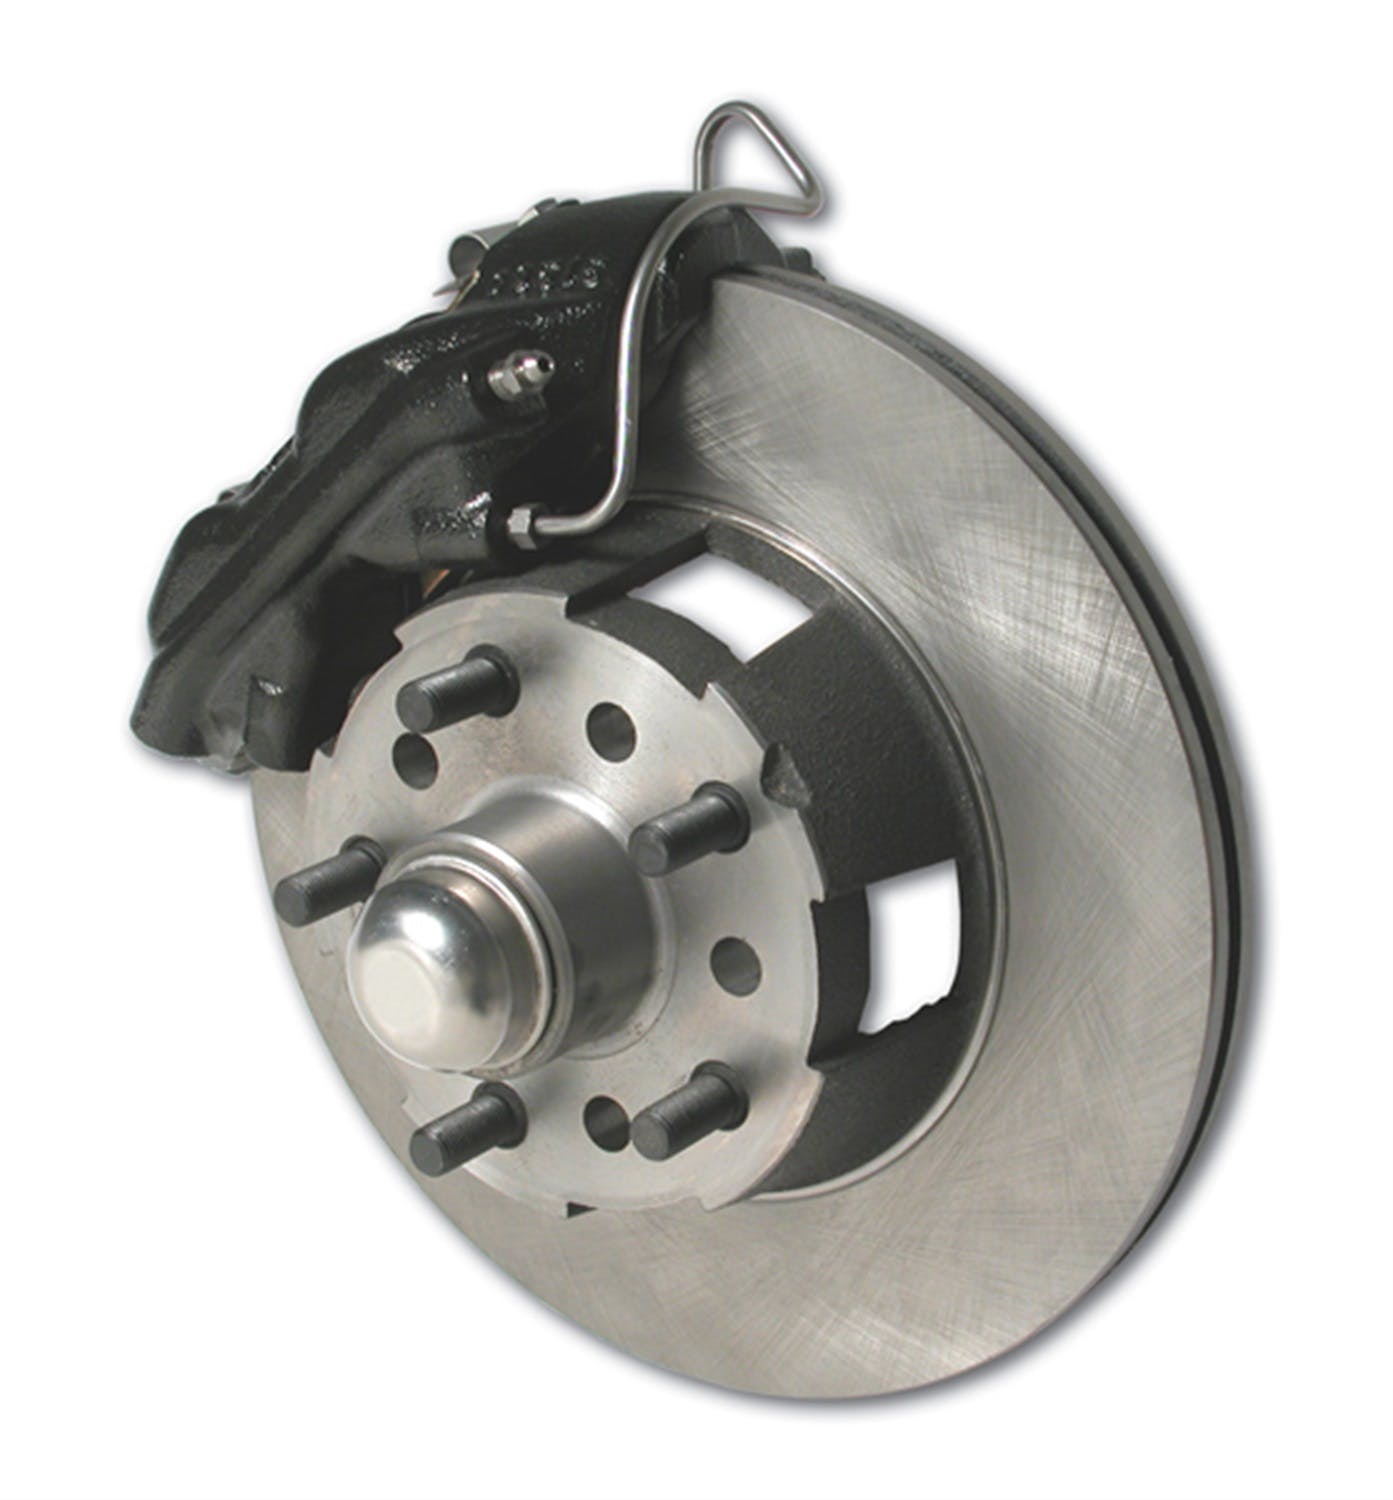 Stainless Steel Brakes W153 At The Wheels Front drm/dsc conv Mopar A-Body